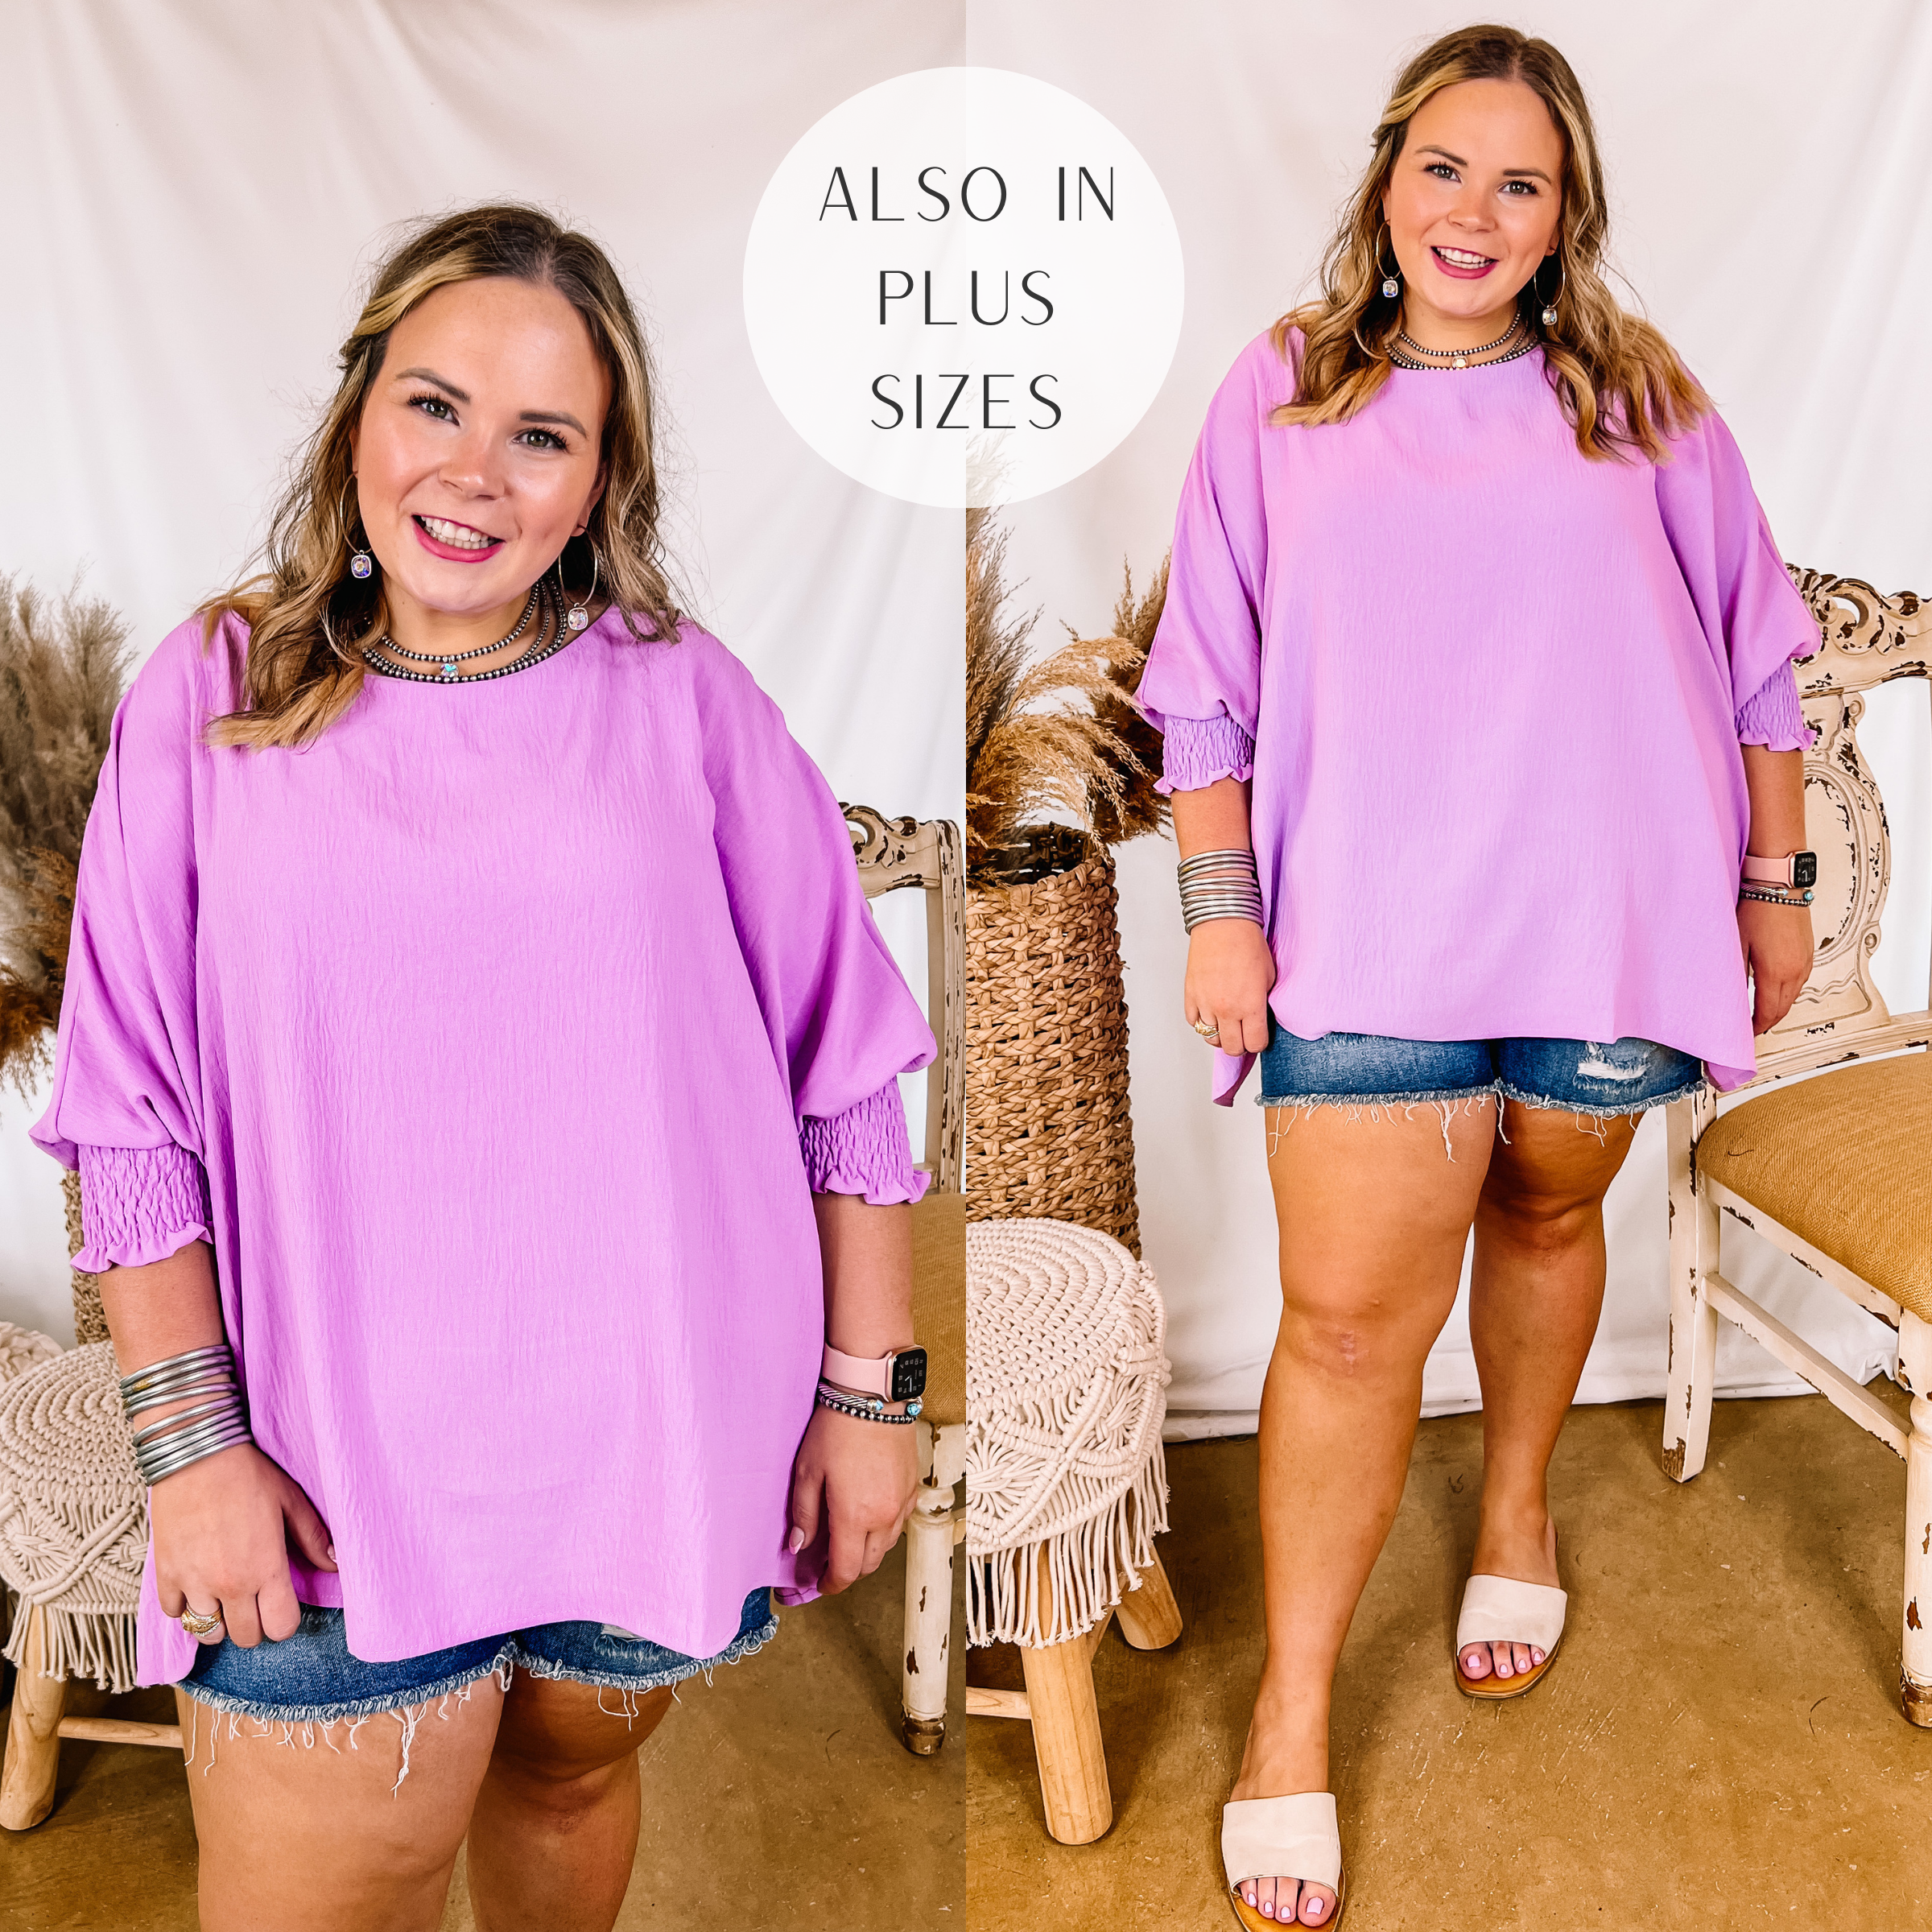 Model is wearing a purple oversized top with 3/4 sleeves. Model has this top paired with distressed denim shorts, white sandals, and silver jewelry.